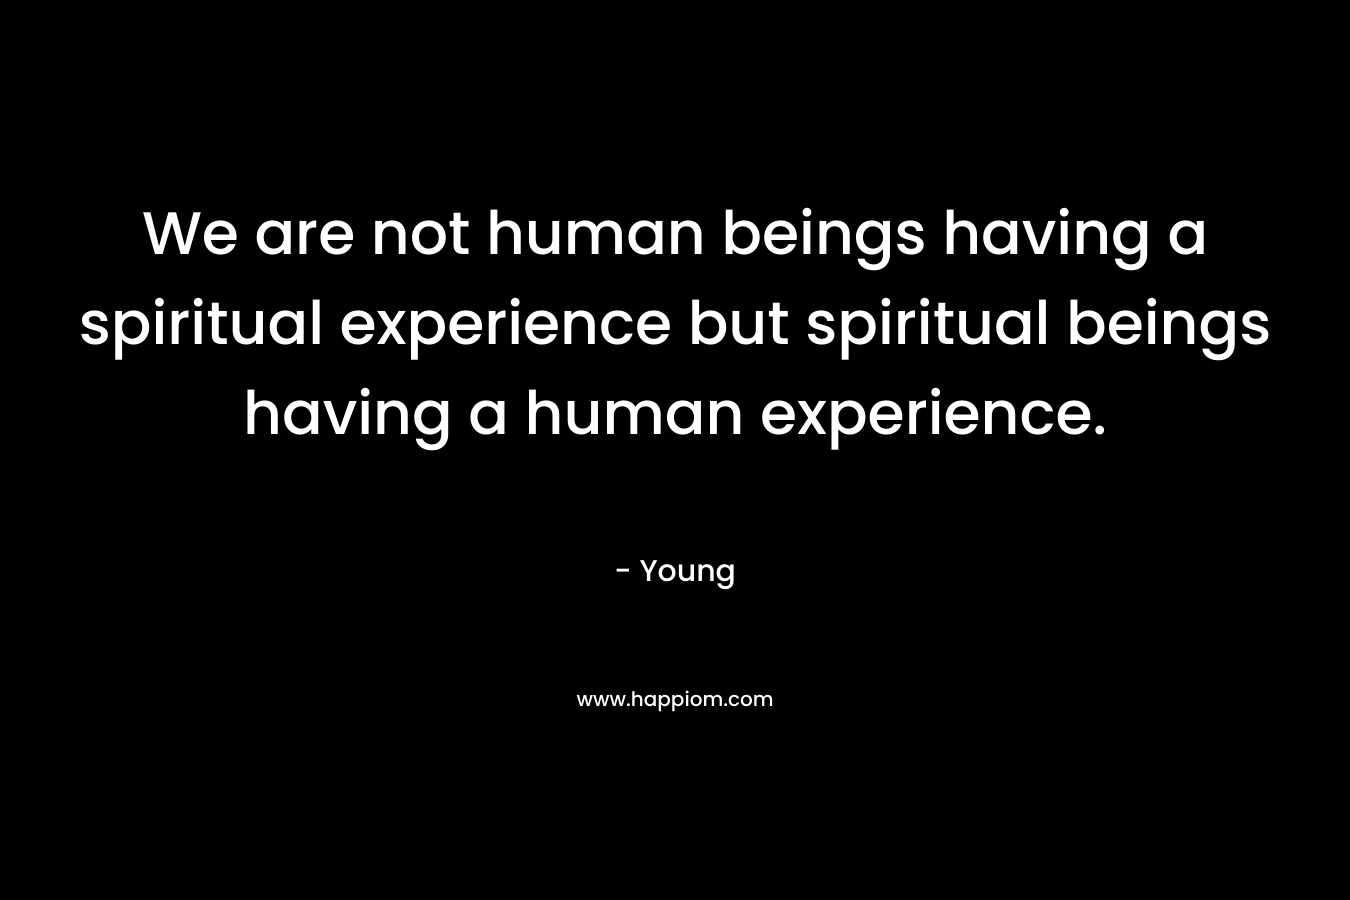 We are not human beings having a spiritual experience but spiritual beings having a human experience.